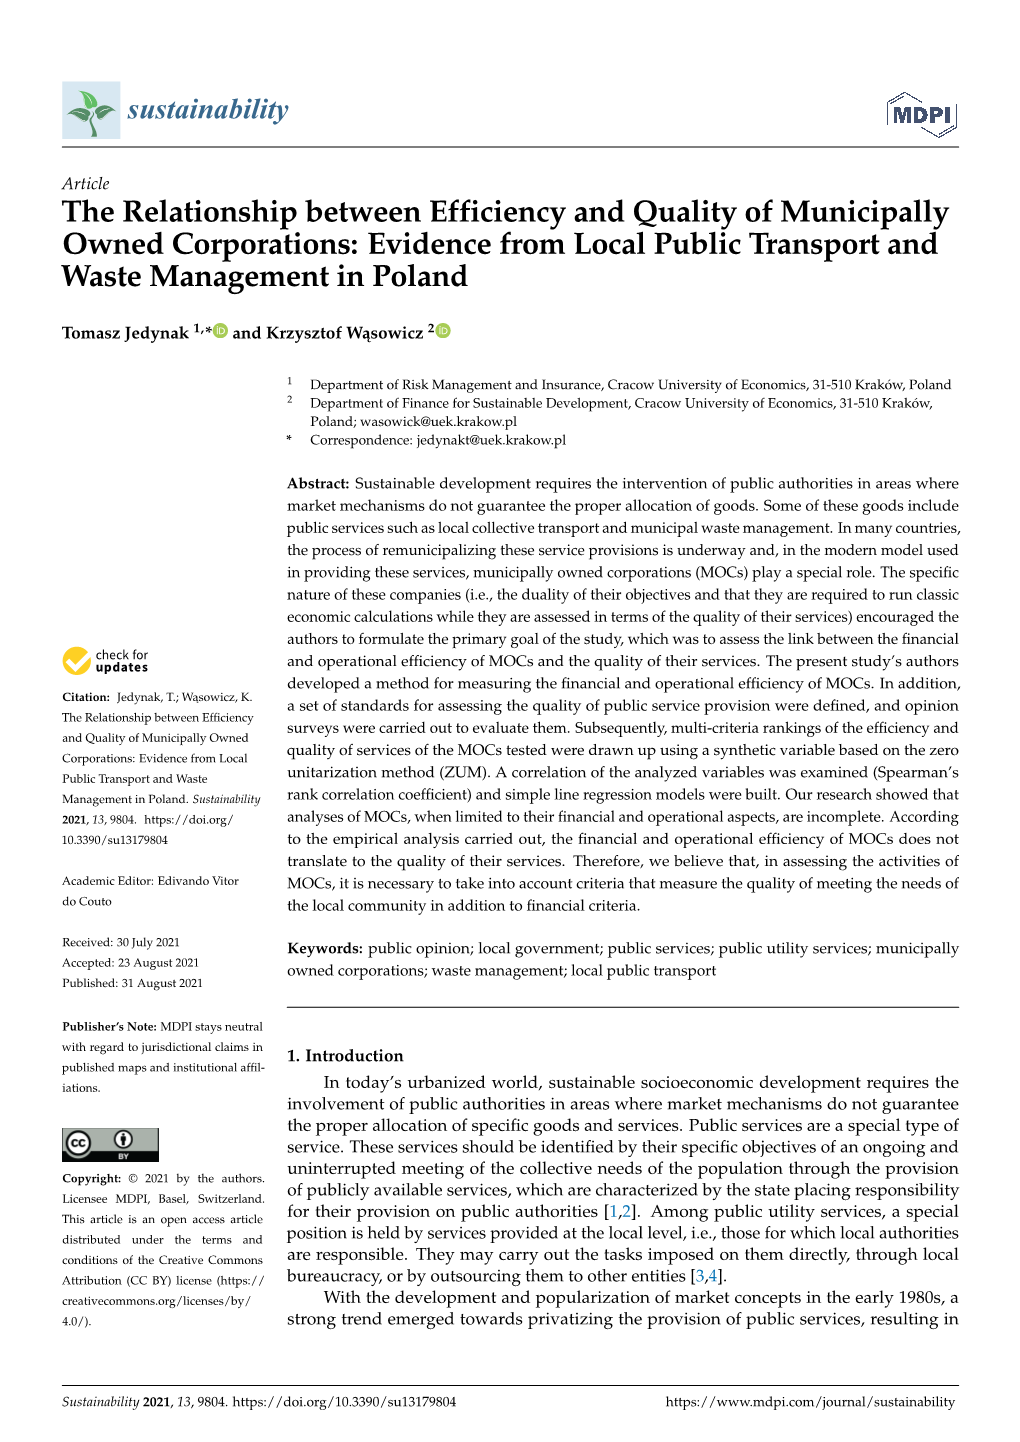 The Relationship Between Efficiency and Quality of Municipally Owned Corporations: Evidence from Local Public Transport and Waste Management in Poland